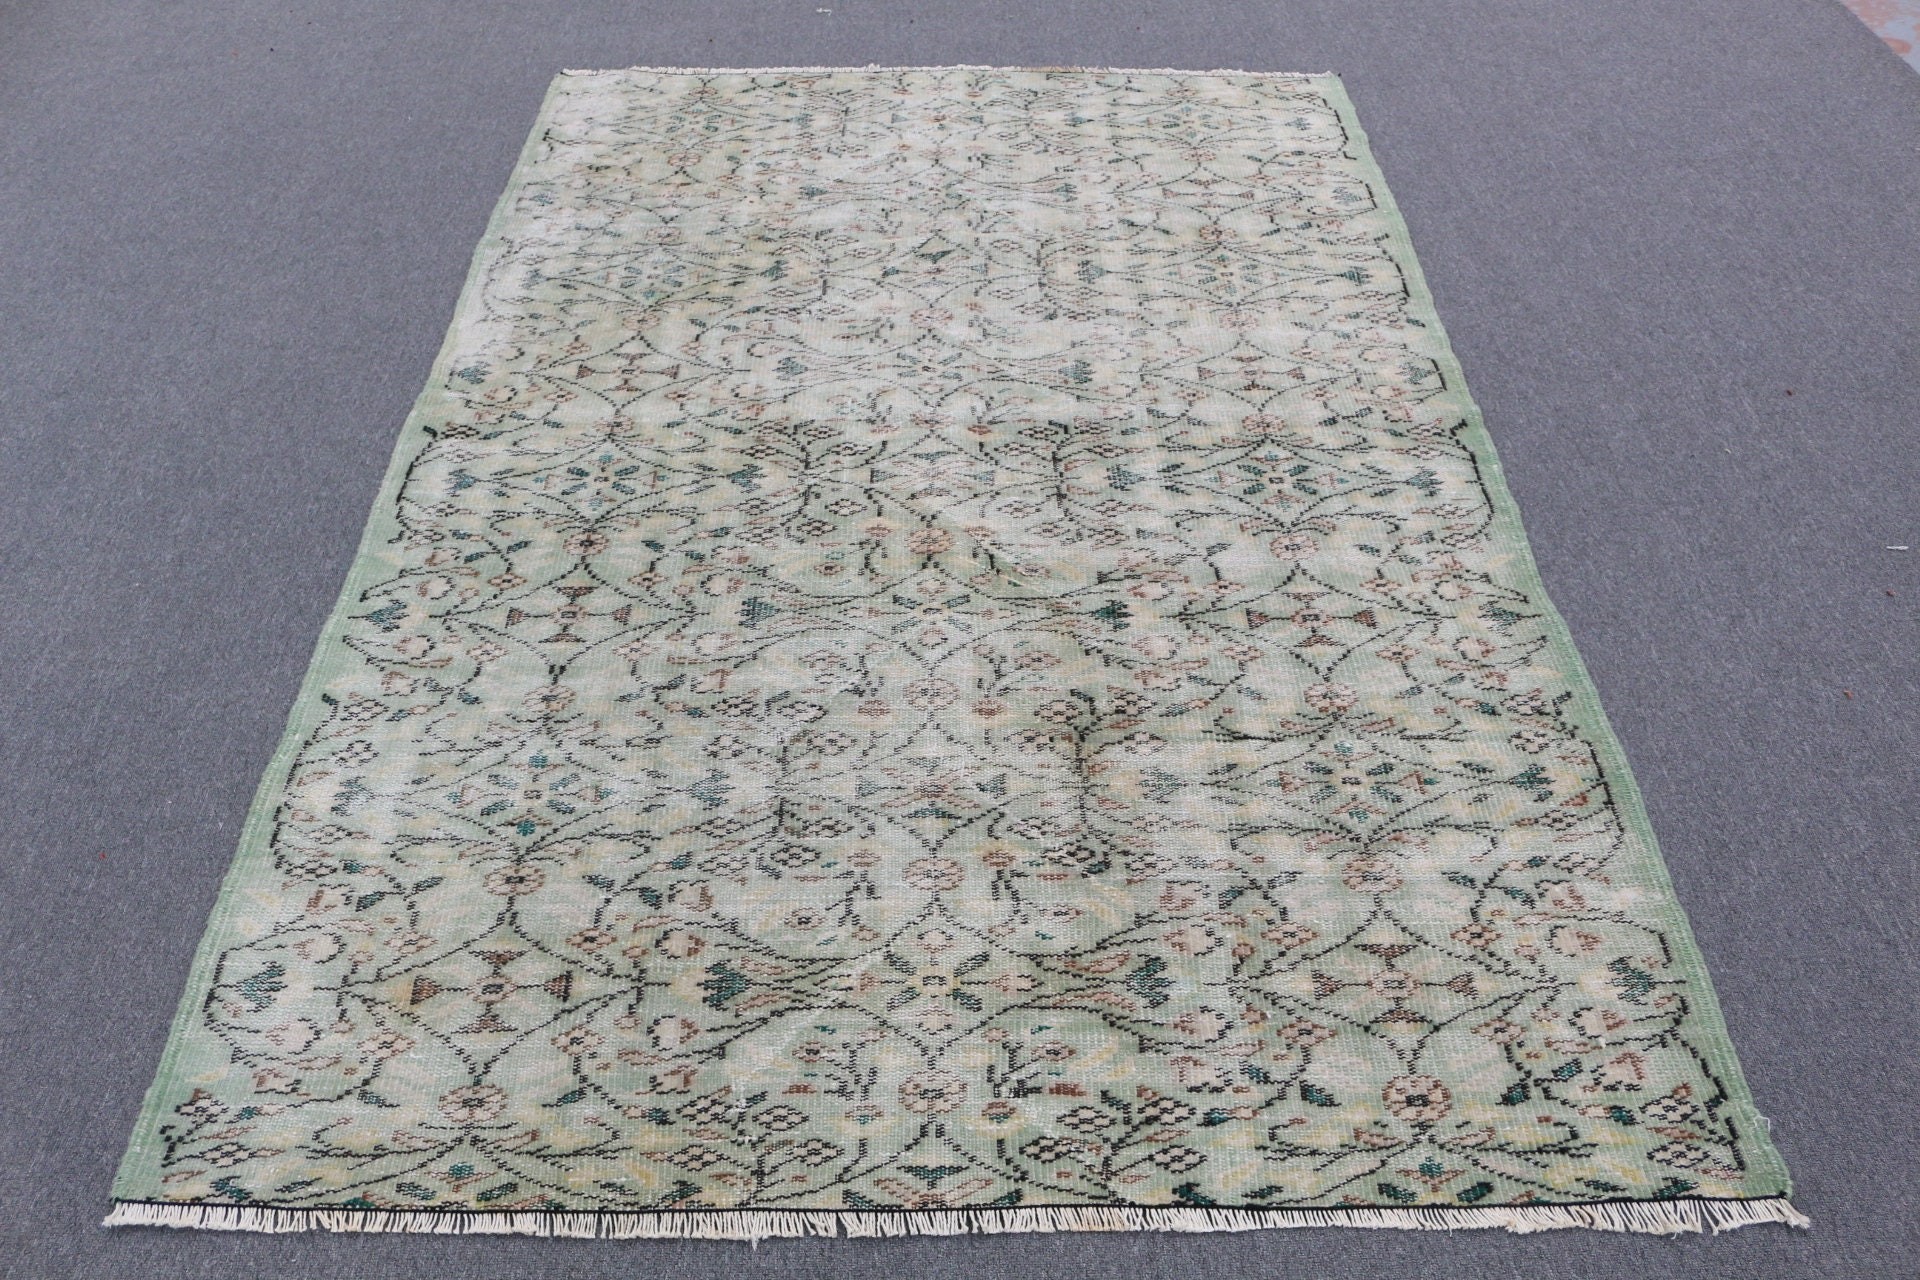 Anatolian Rug, 4.9x7.4 ft Area Rugs, Rugs for Area, Green Antique Rug, Pastel Rugs, Moroccan Rug, Indoor Rug, Turkish Rug, Vintage Rugs